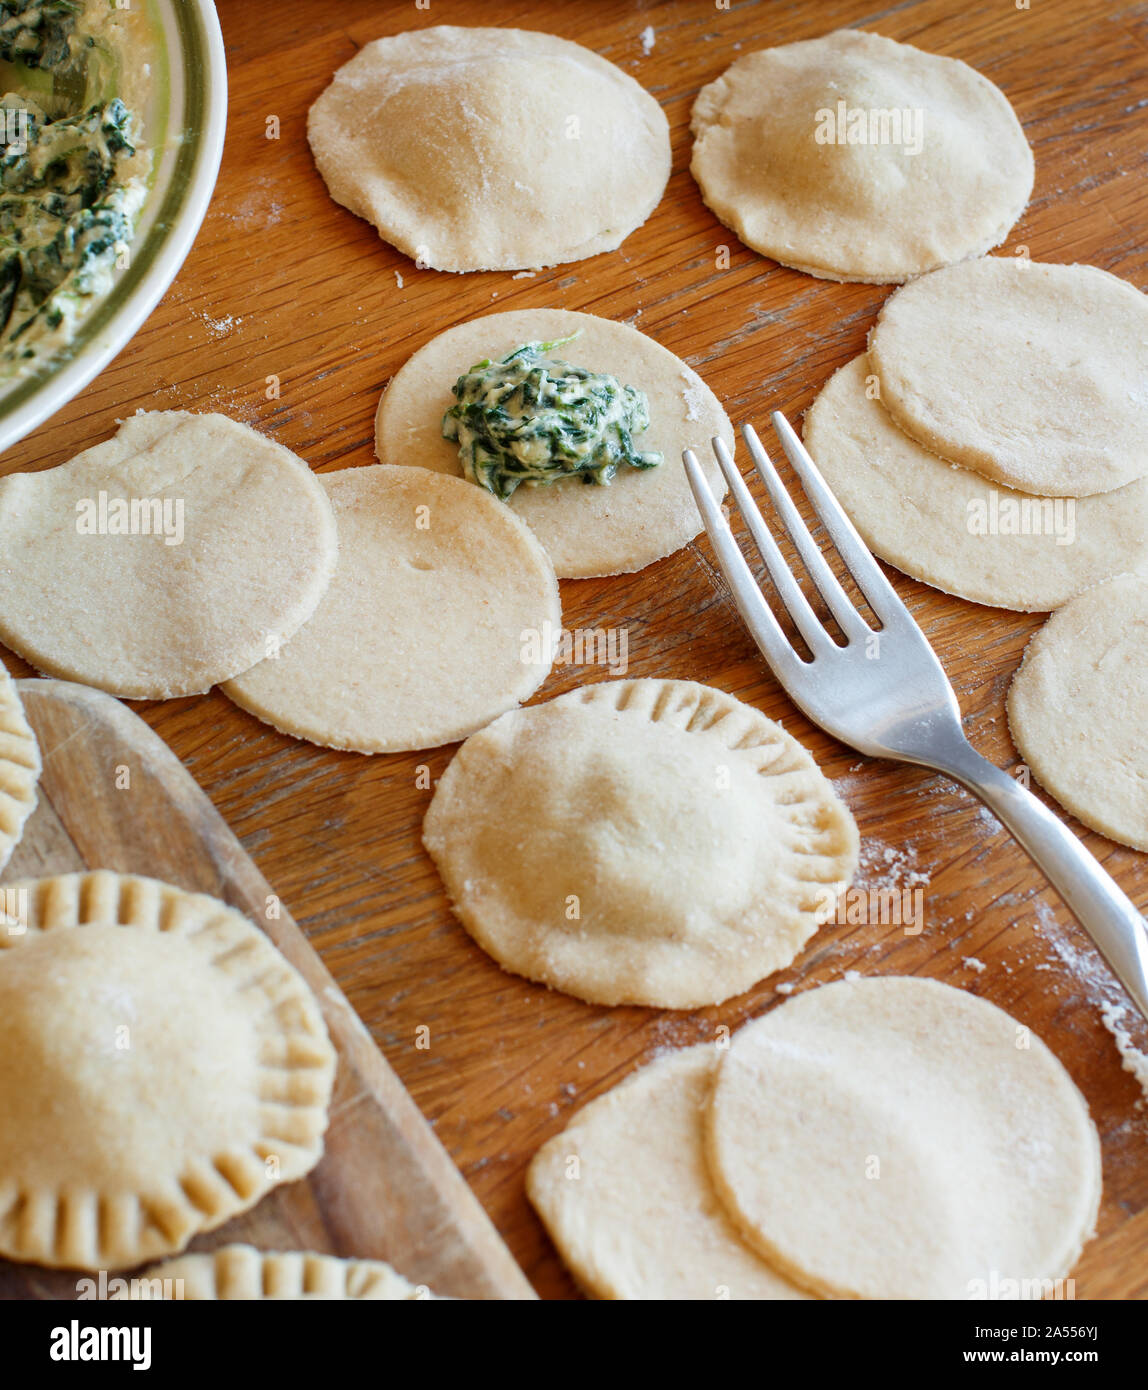 Making ravioli with ricotta cheese and spinach on a wooden board Stock Photo